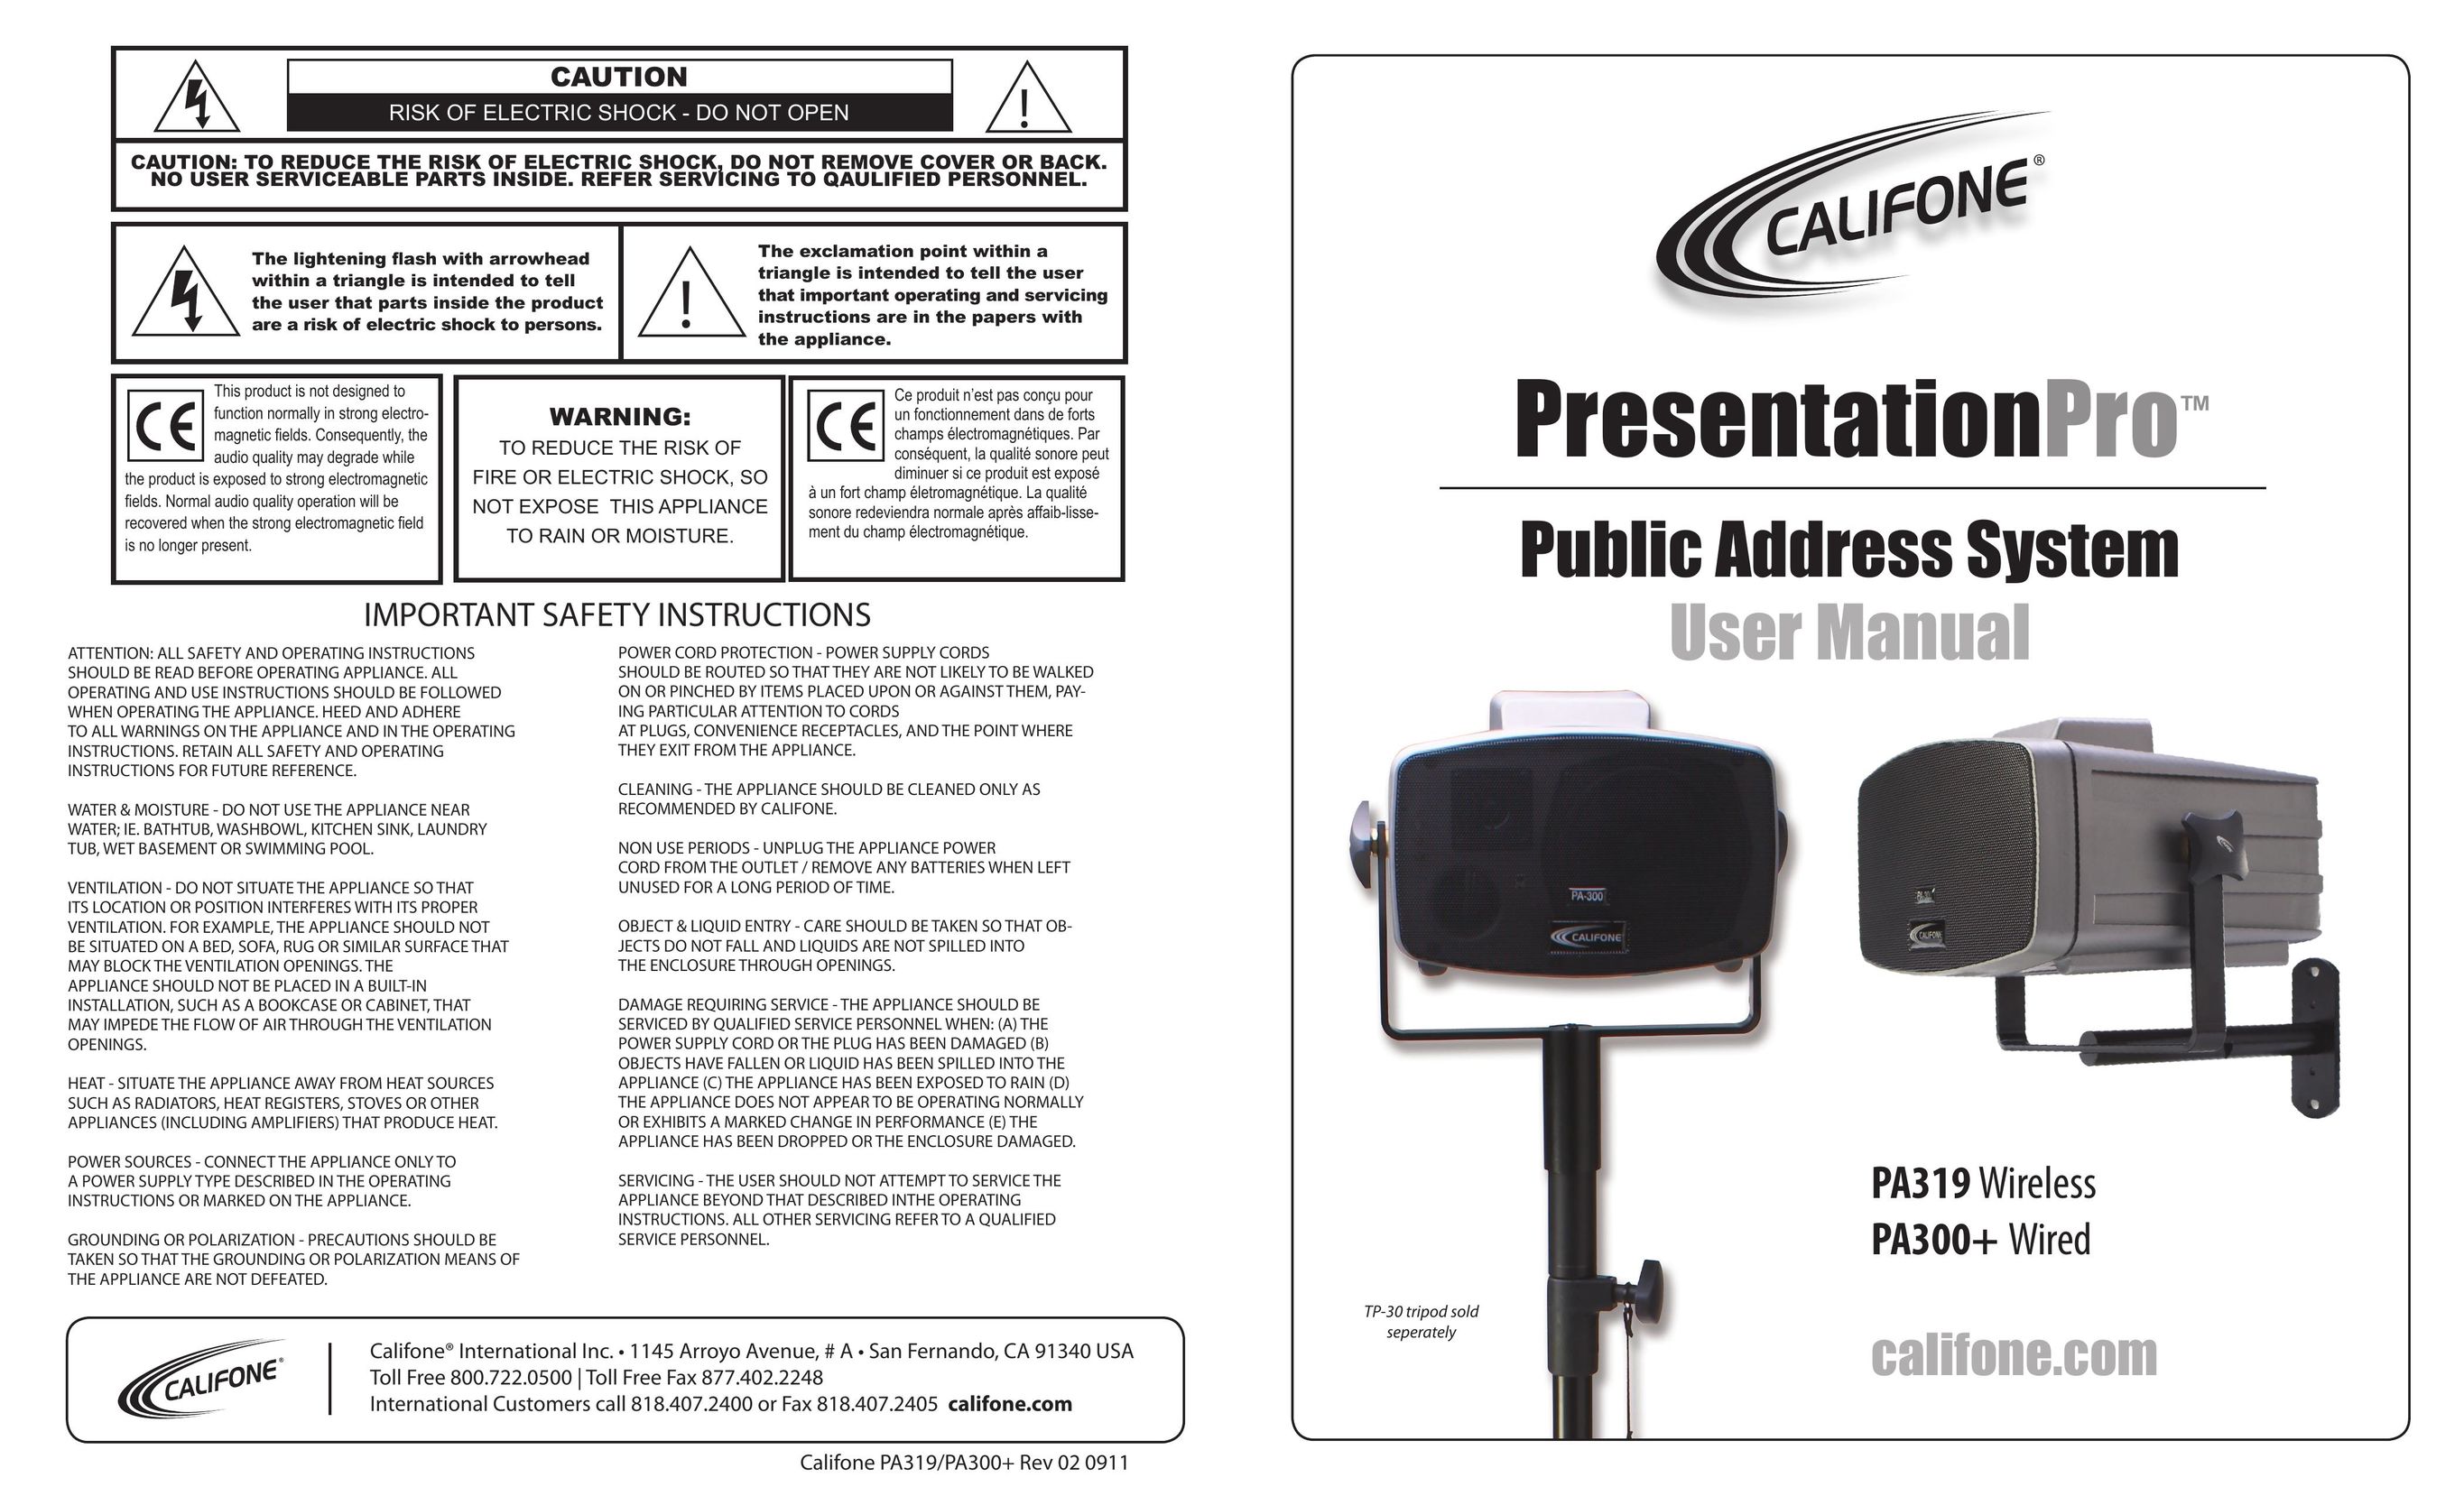 Califone PA300+ Wired Projector User Manual